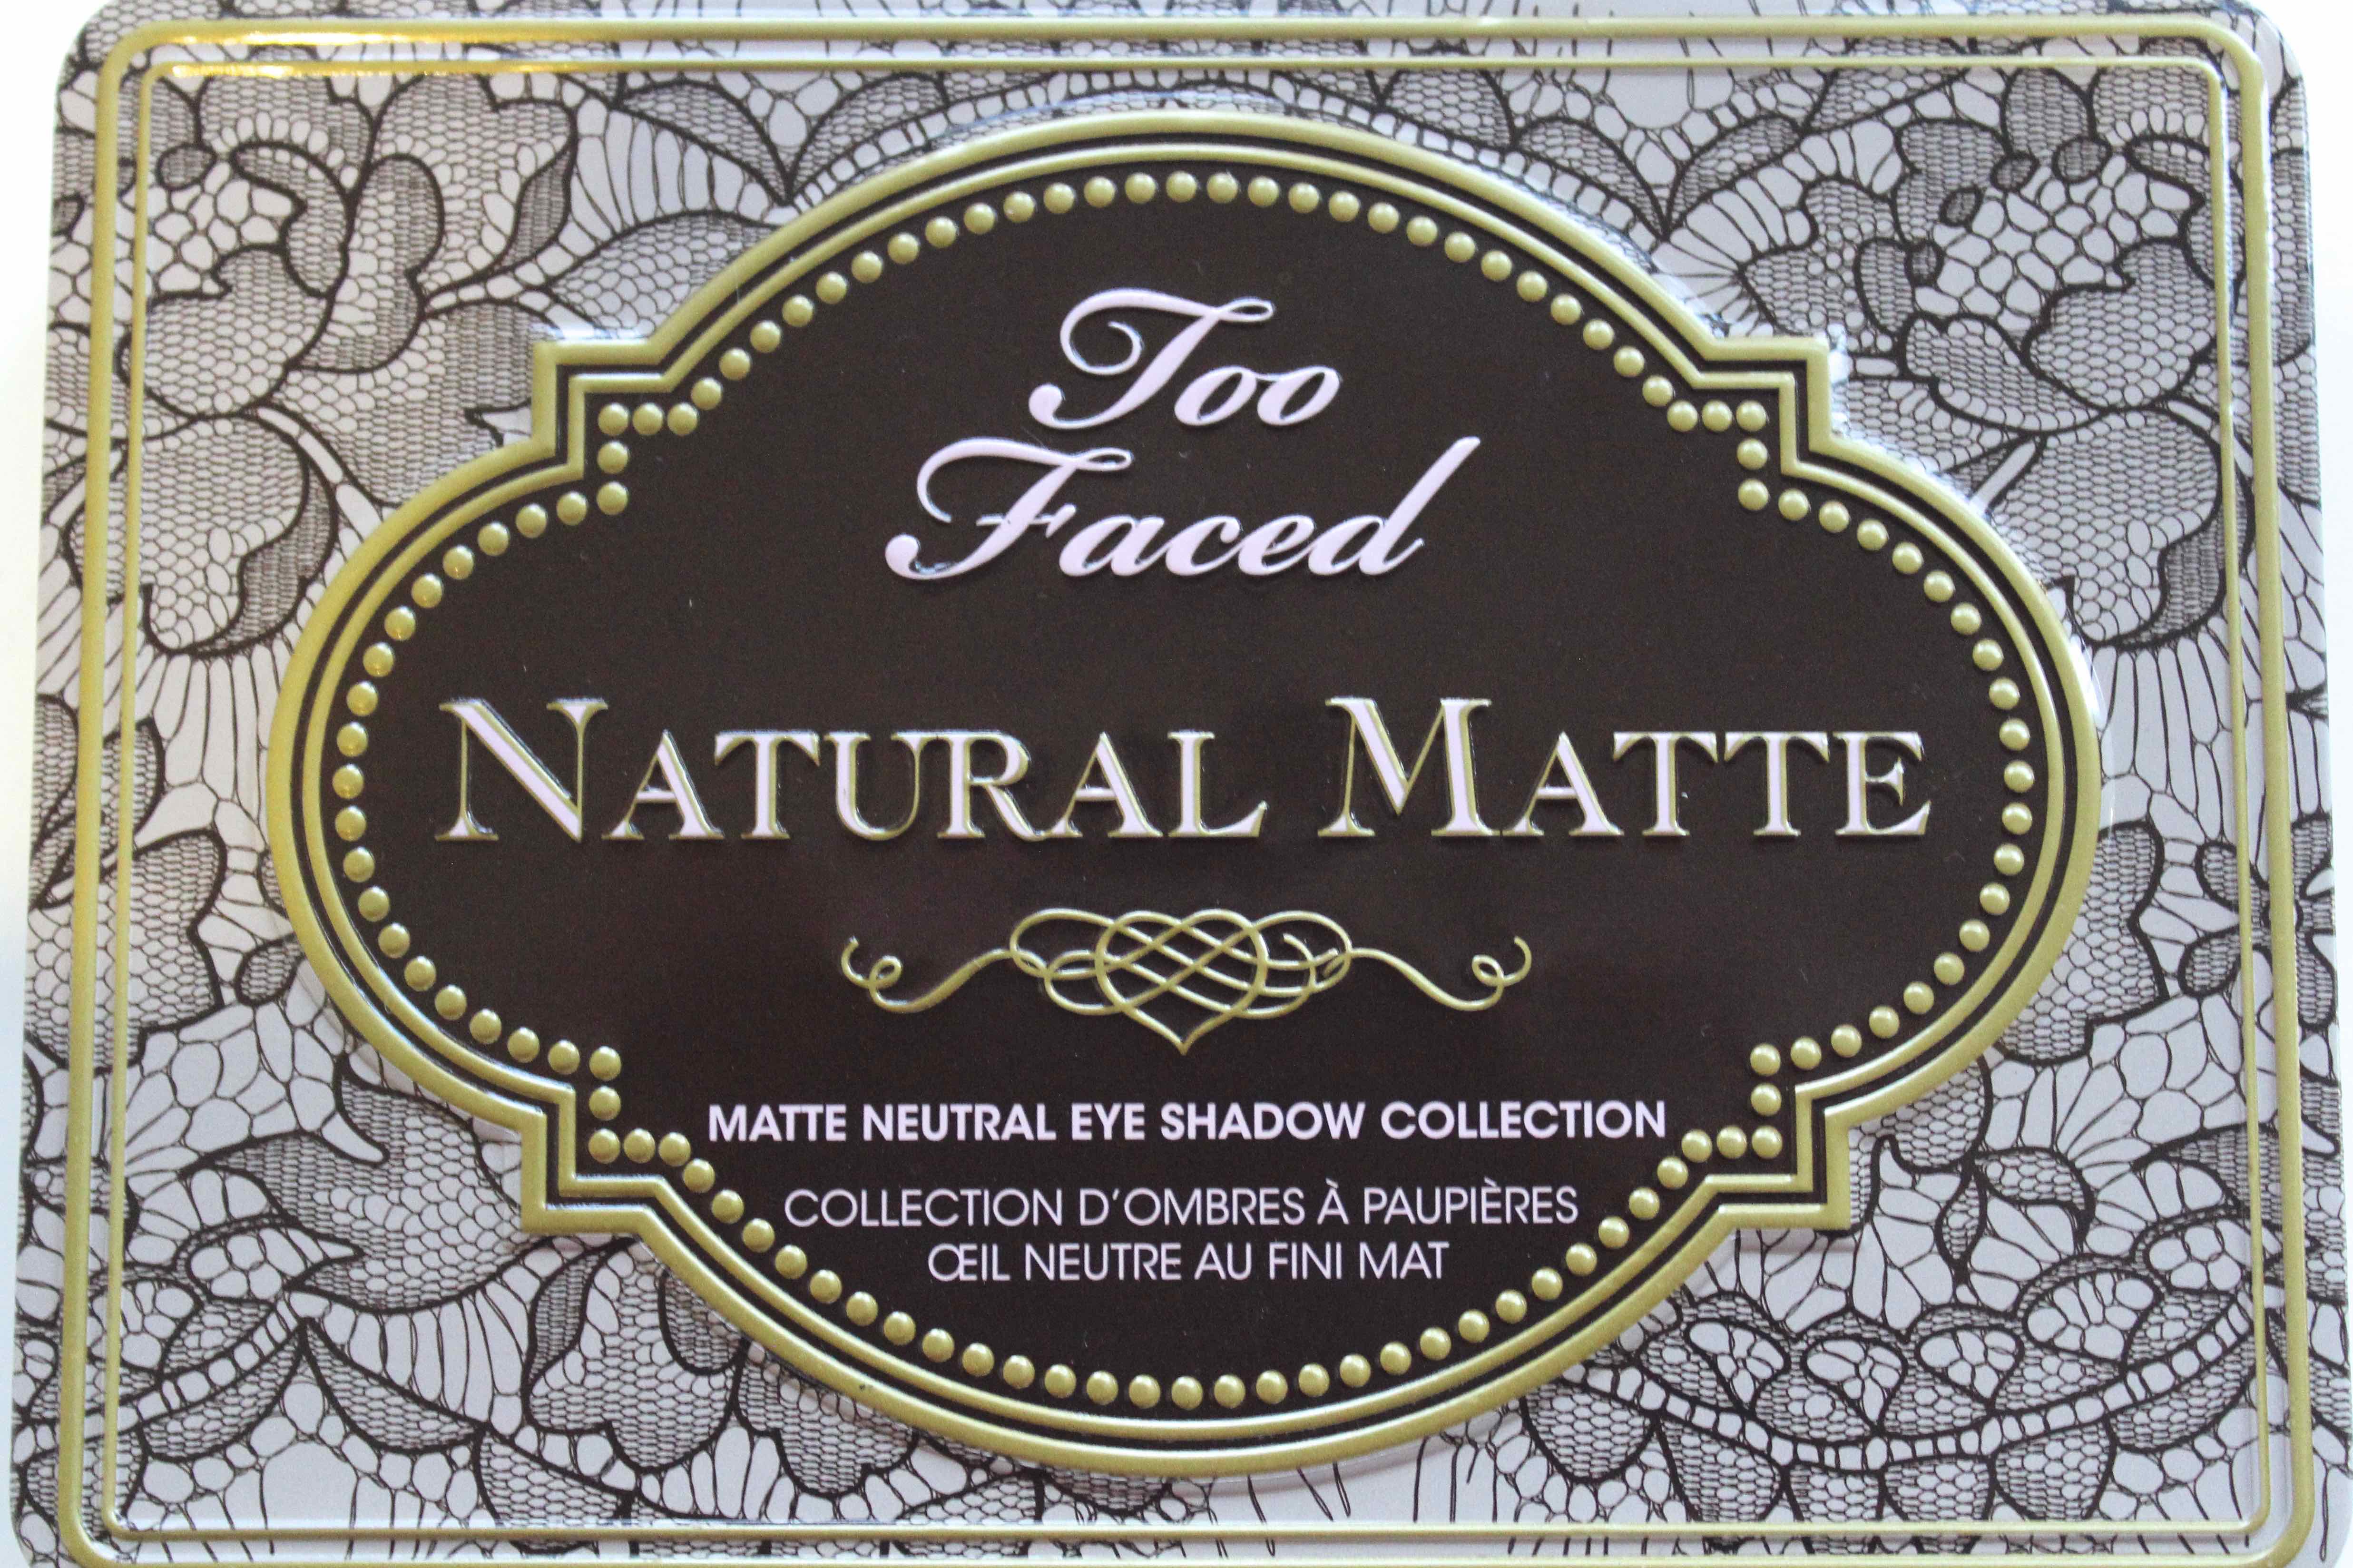 Too Faced Natural Matte Eyeshadow Palette- The Packaging- by Face Made Up